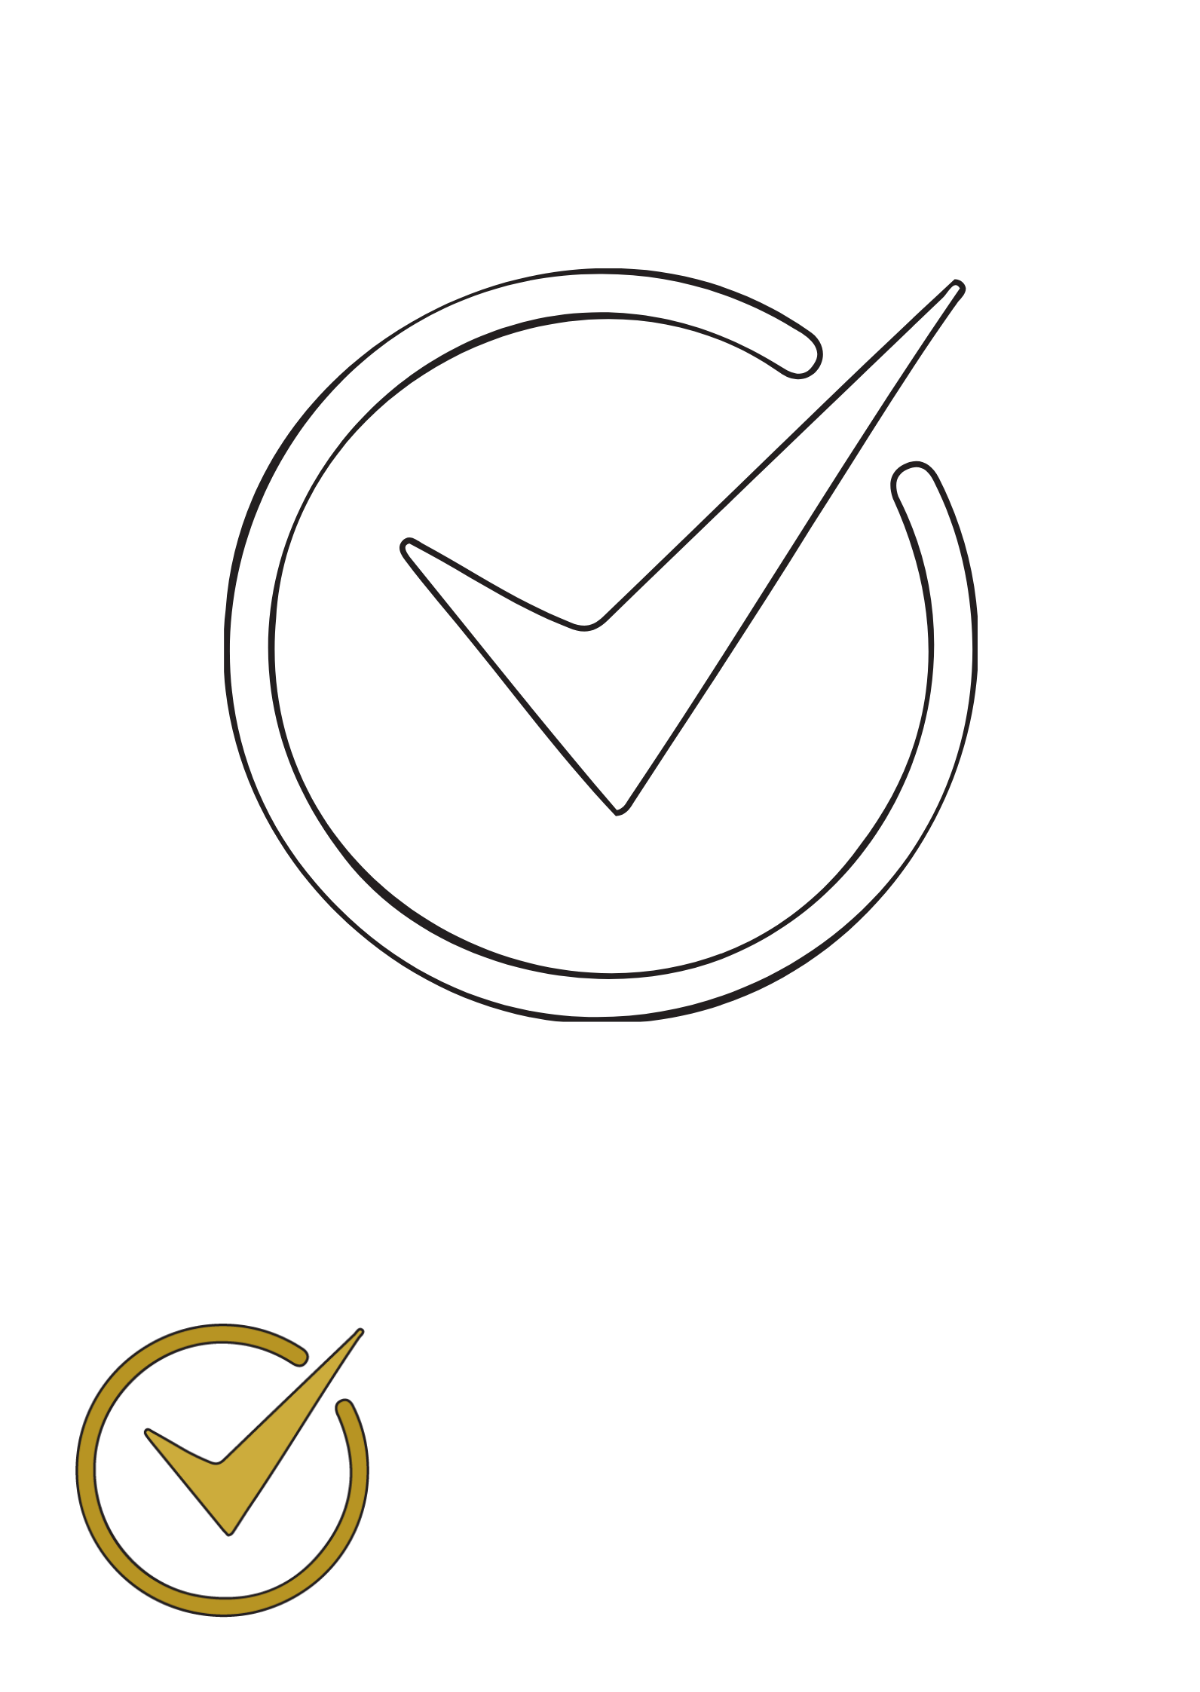 Gold Check Mark coloring page Template